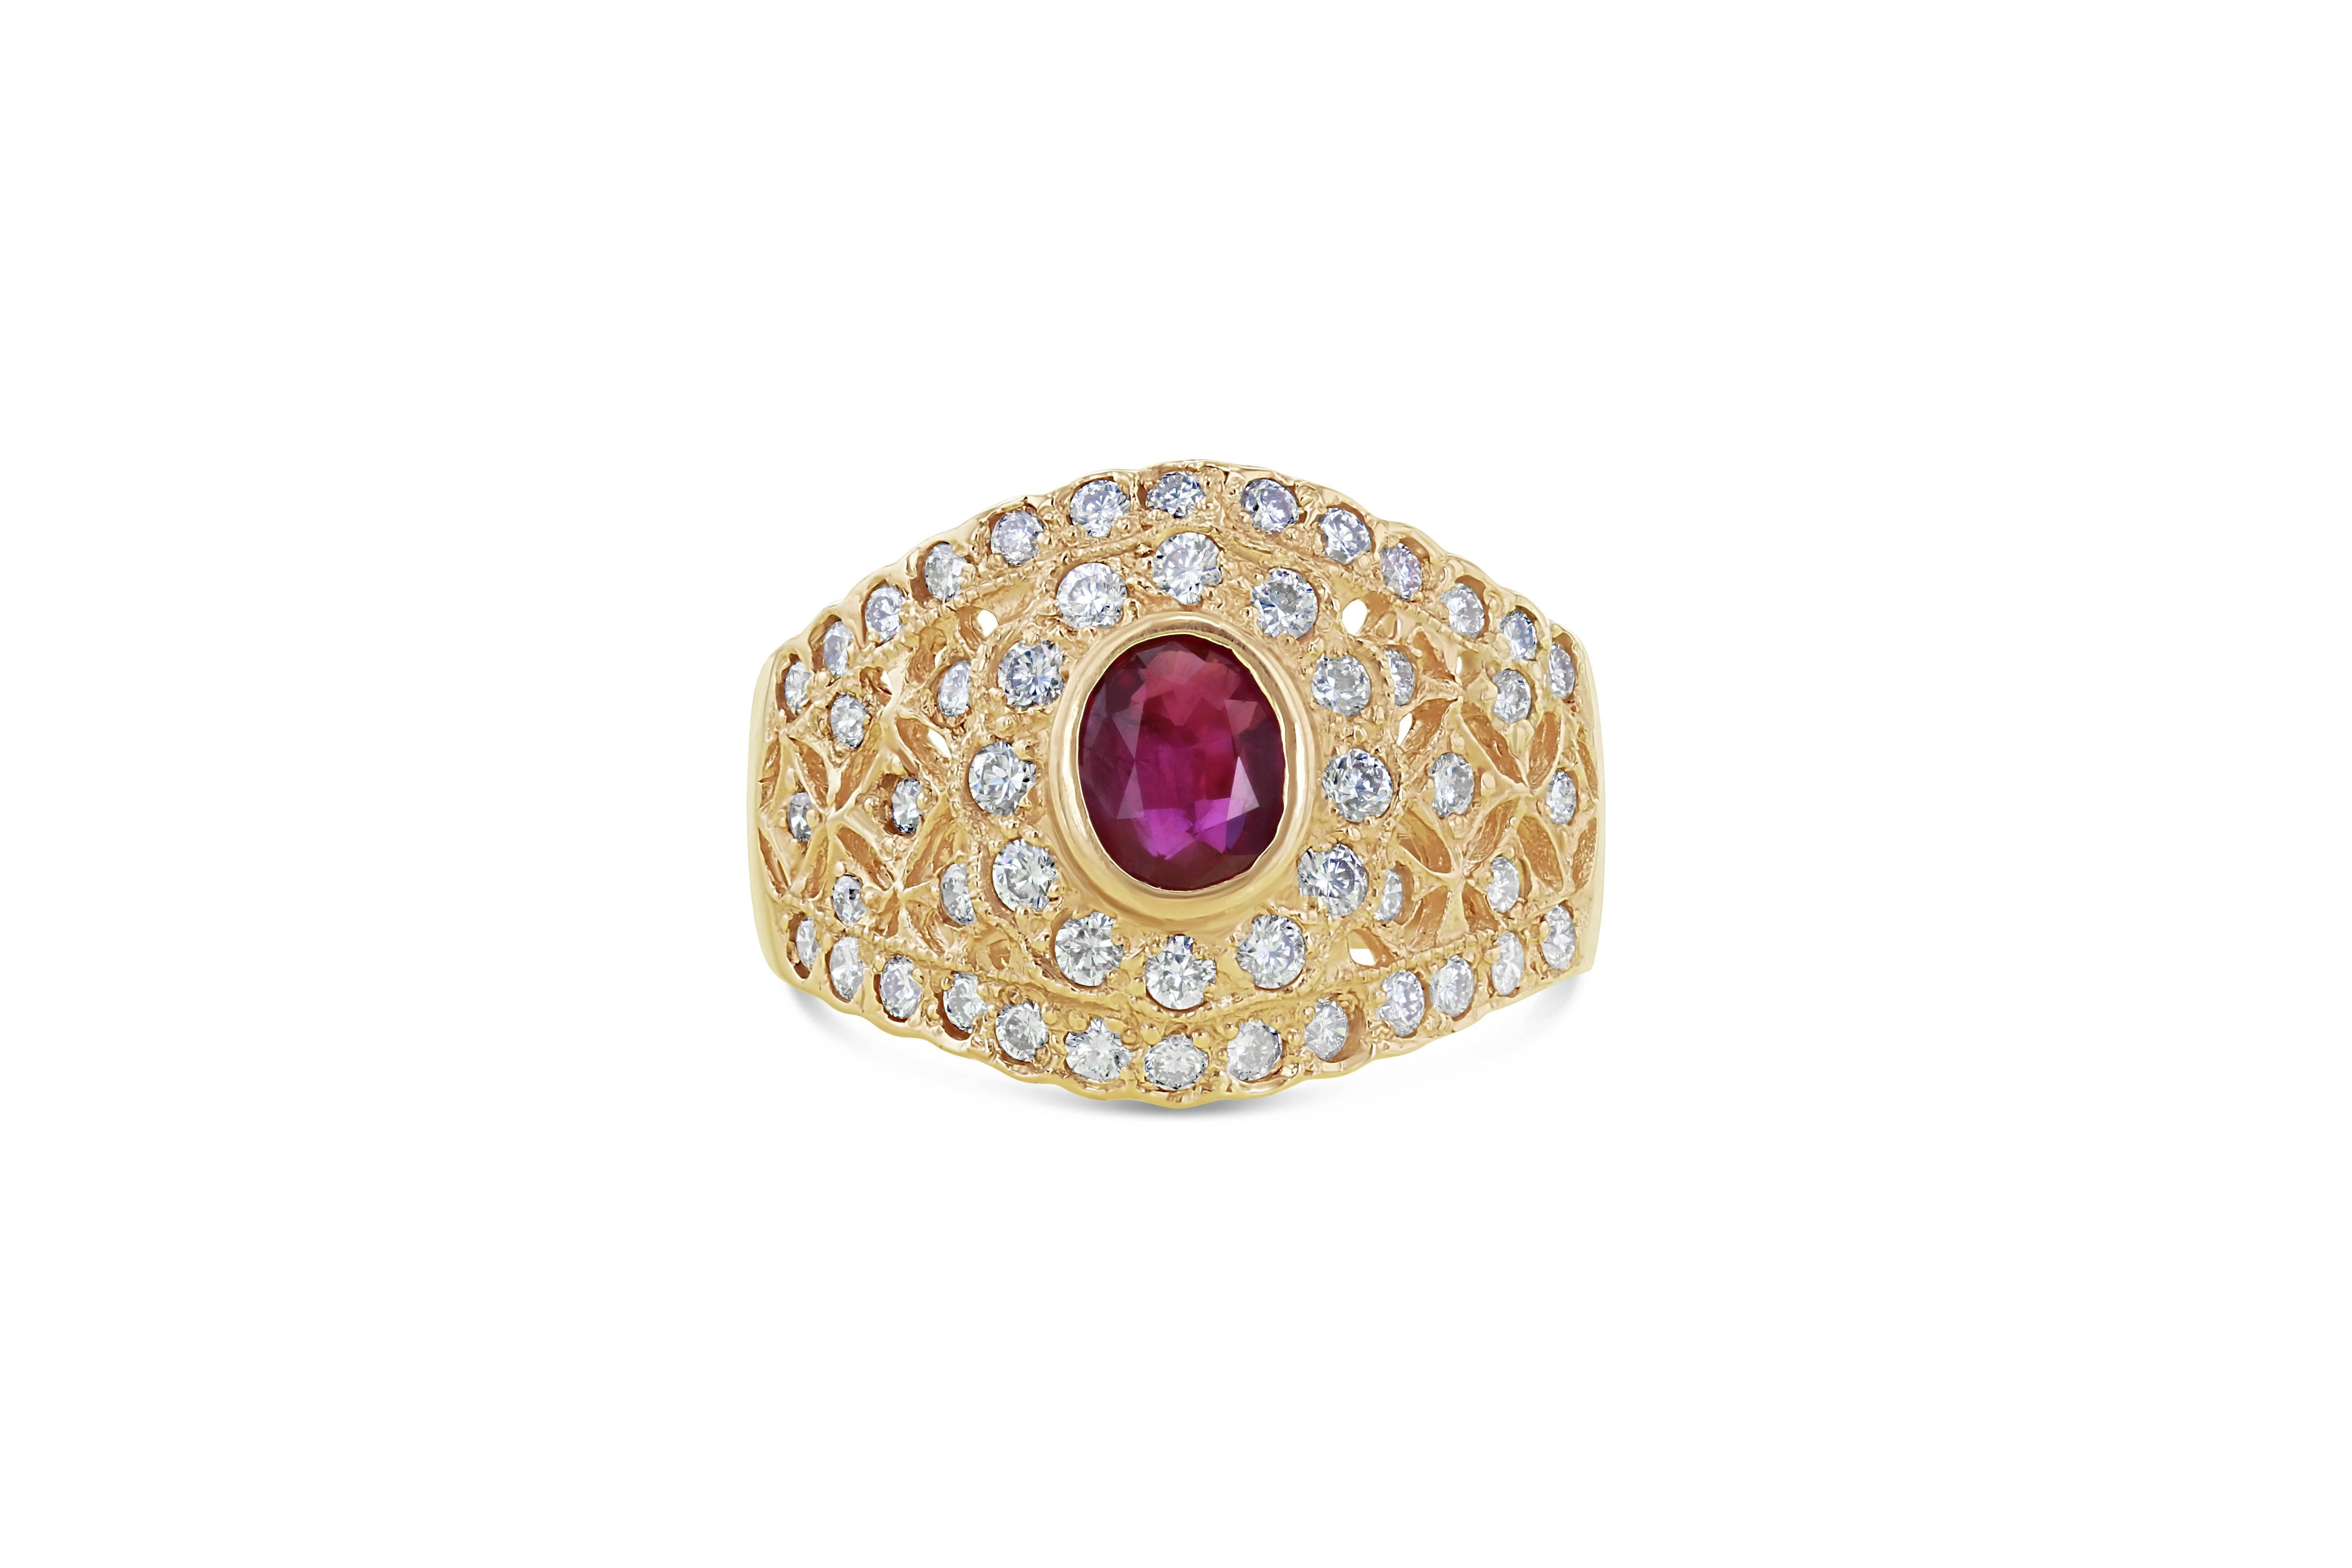 This Art-Deco Inspired Ring is truly a unique vintage beauty! The Ruby is 0.79 Carats and is surrounded by 50 Round Cut Diamonds that weigh 0.81 Carats. The diamonds have a clarity of VS and color of H. The gold gram is 6.1 grams and is set in 14K